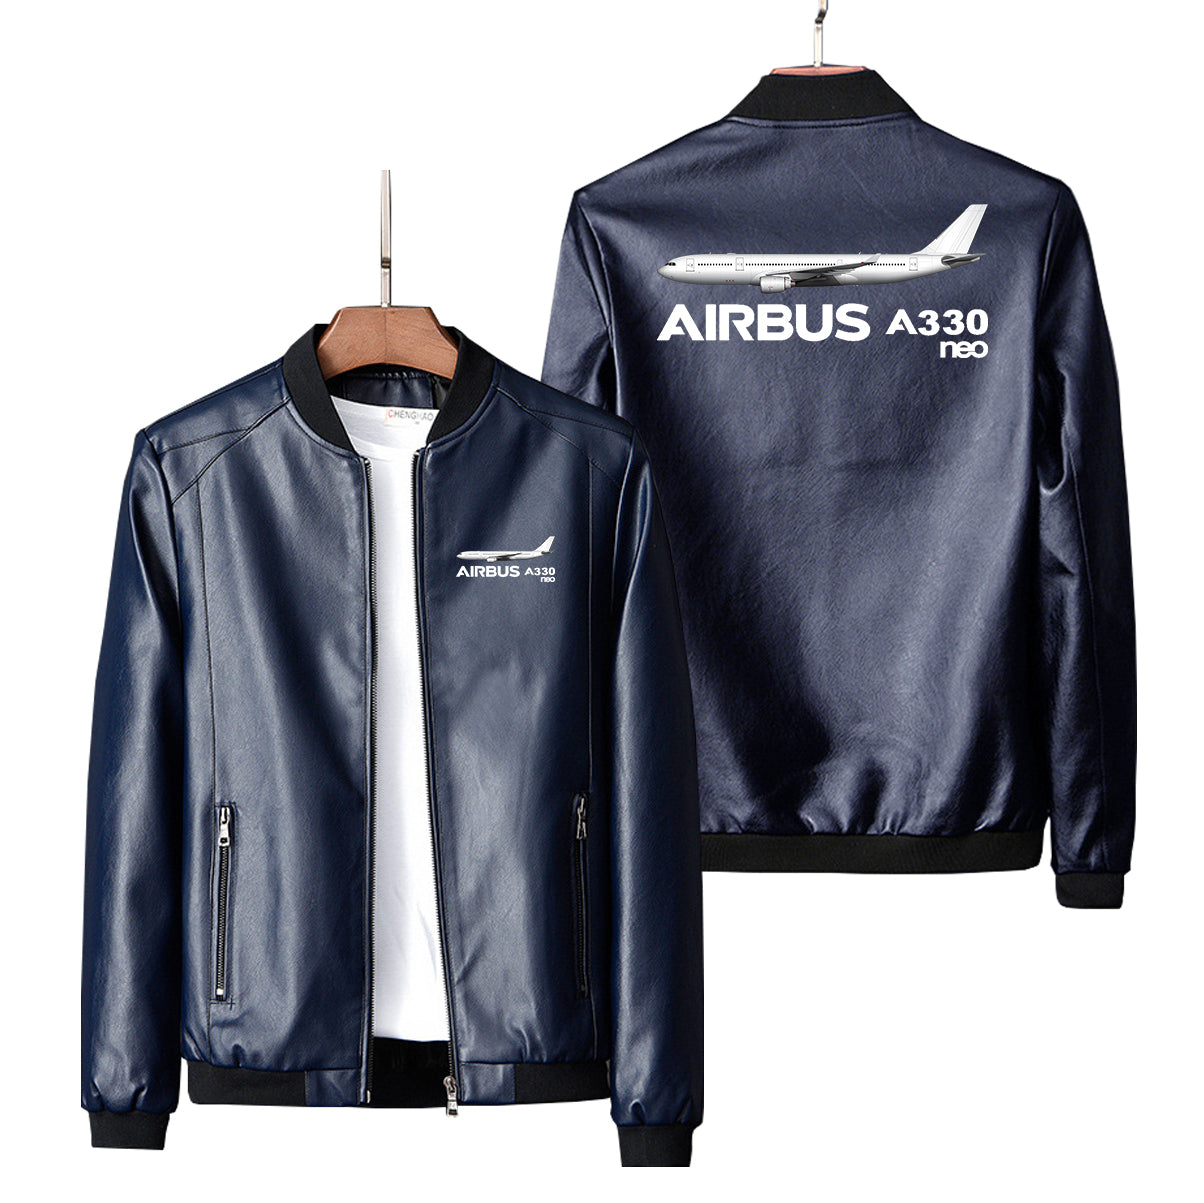 The Airbus A330neo Designed PU Leather Jackets